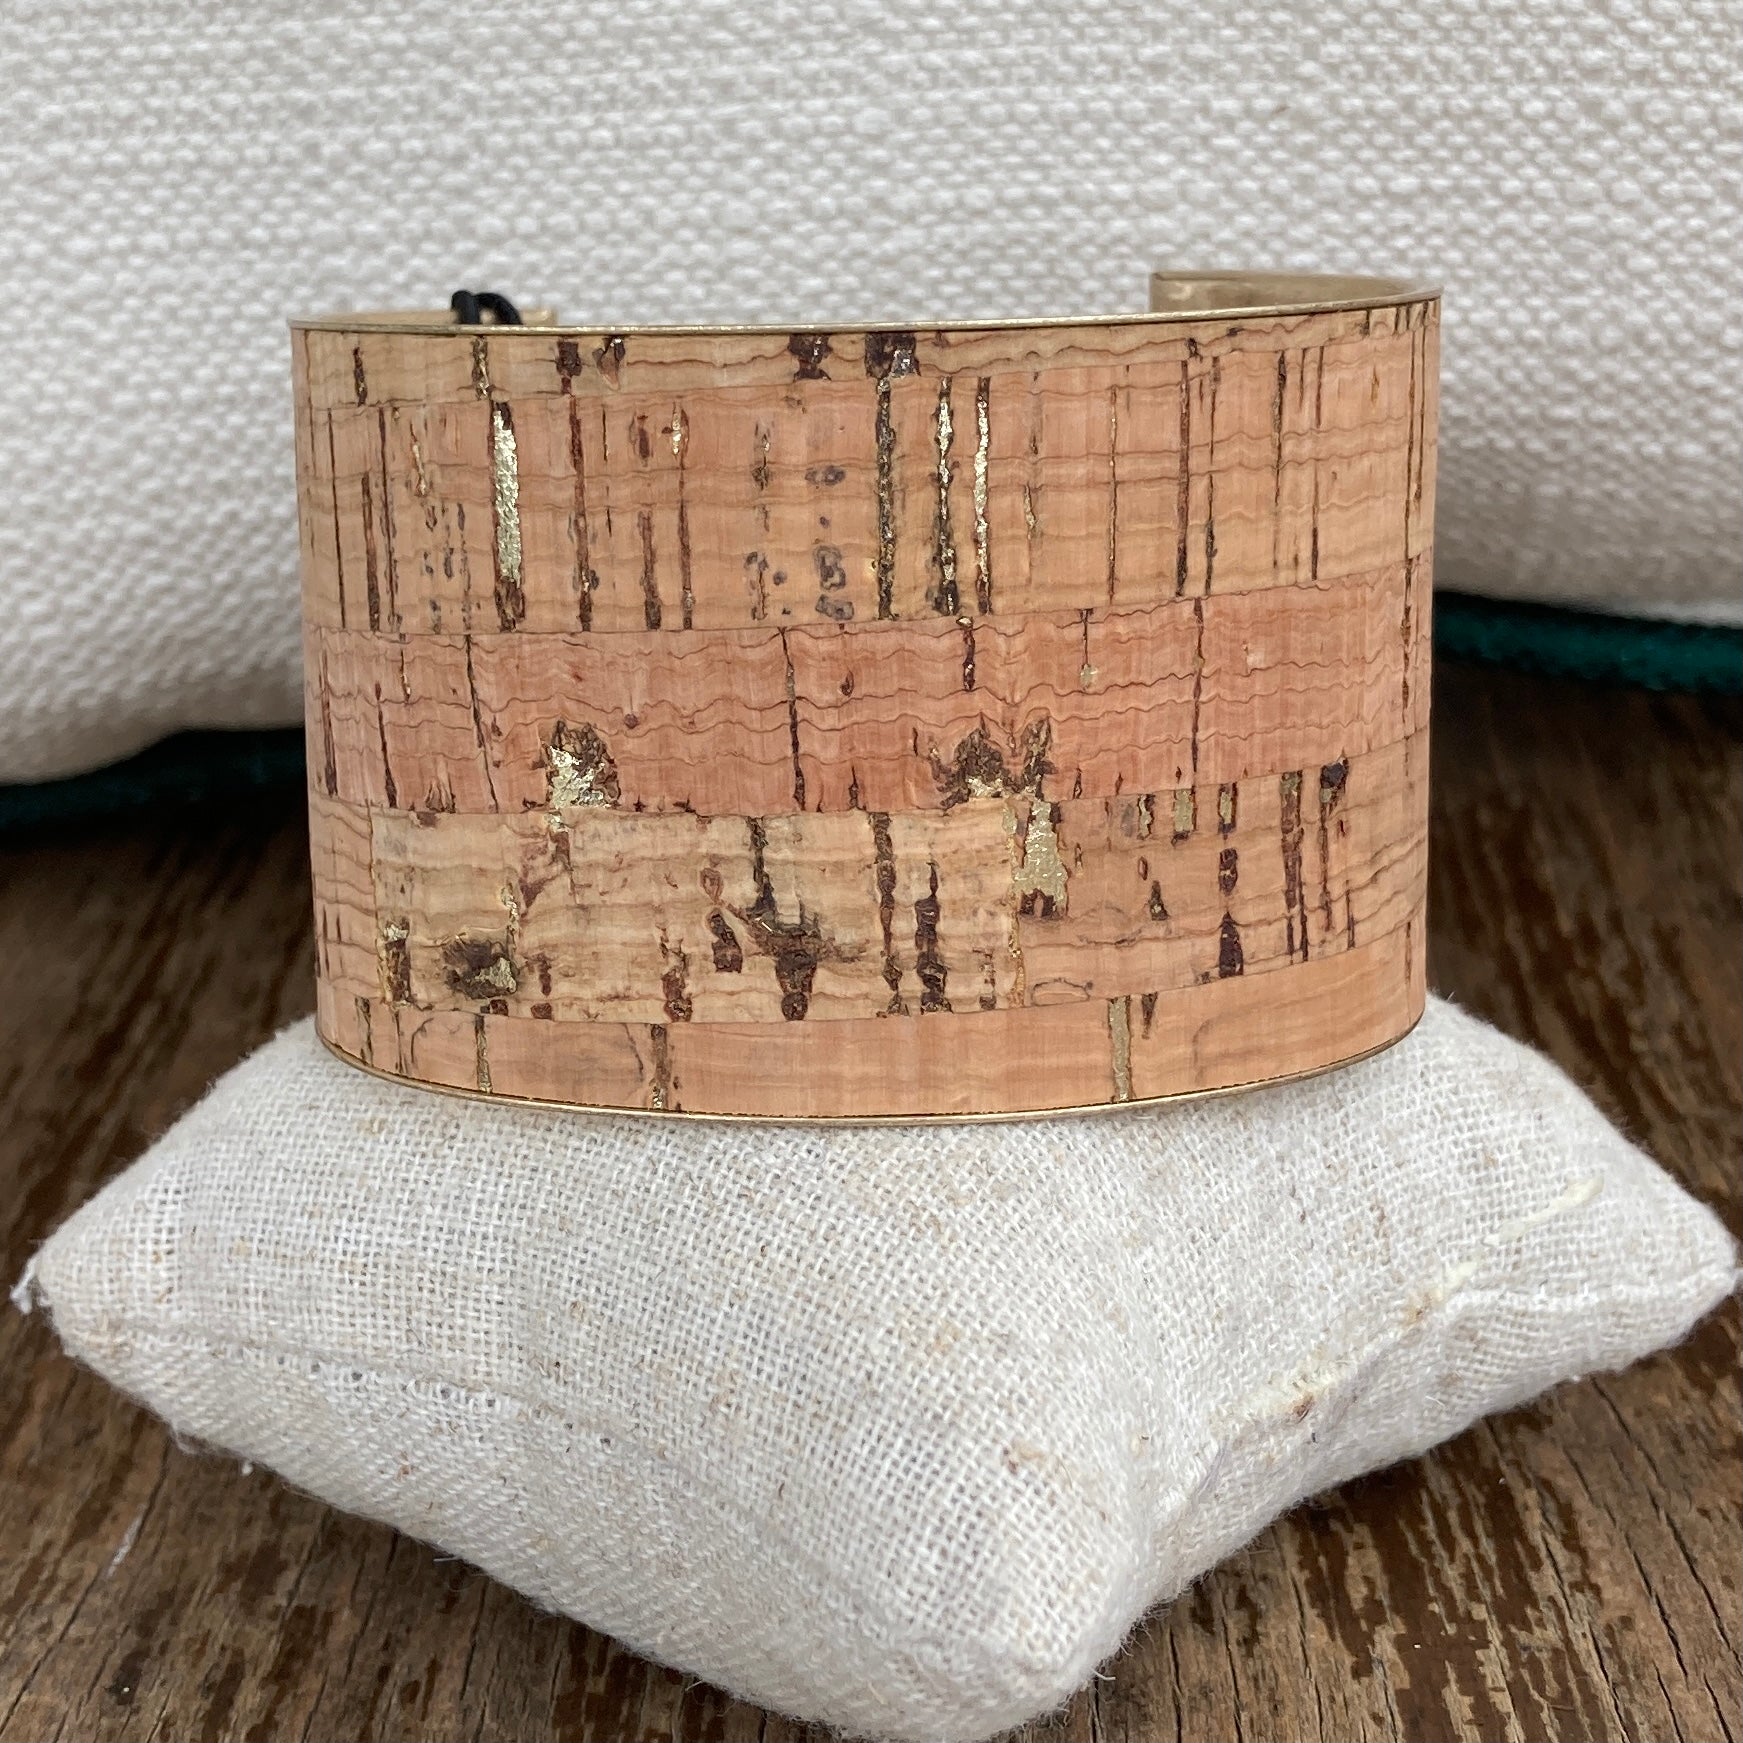 Natural Cork Cuff Bracelet available in neutral with gold flecks throughout